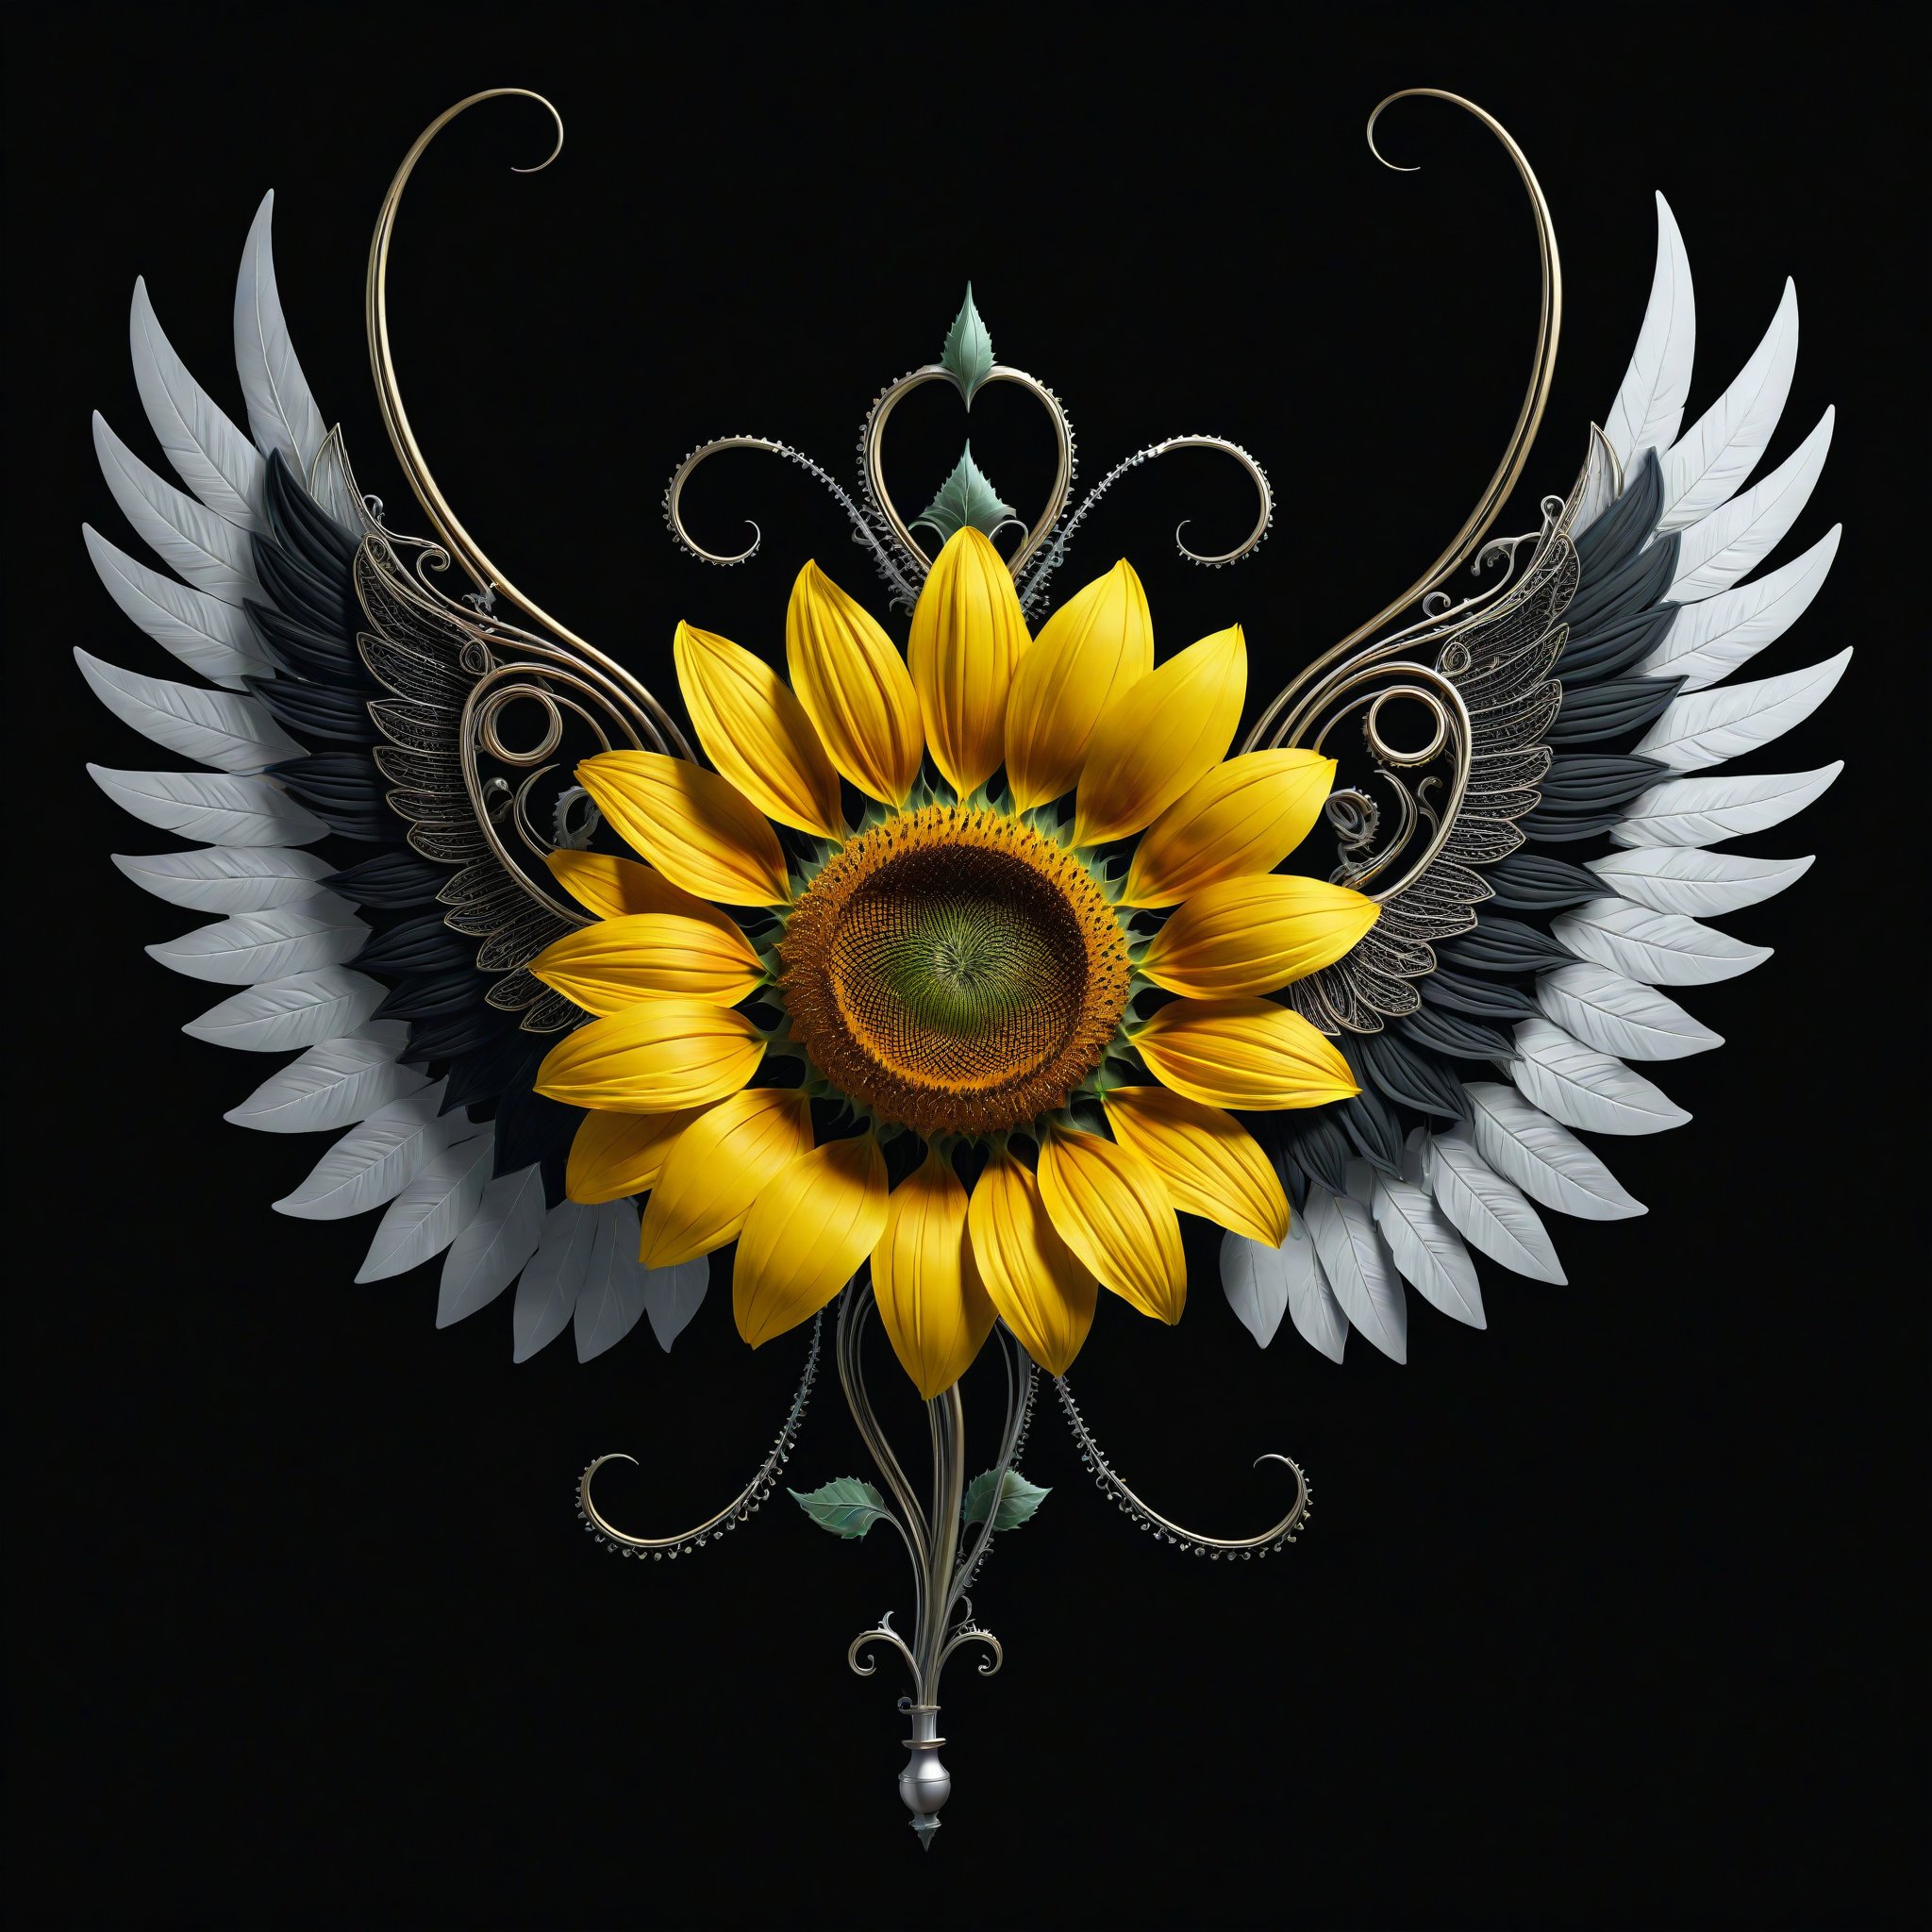 a sunflower whit wing majestic with clasic ornament Mechanical lines Elegance T-shirt design, BLACK BACKGROUND